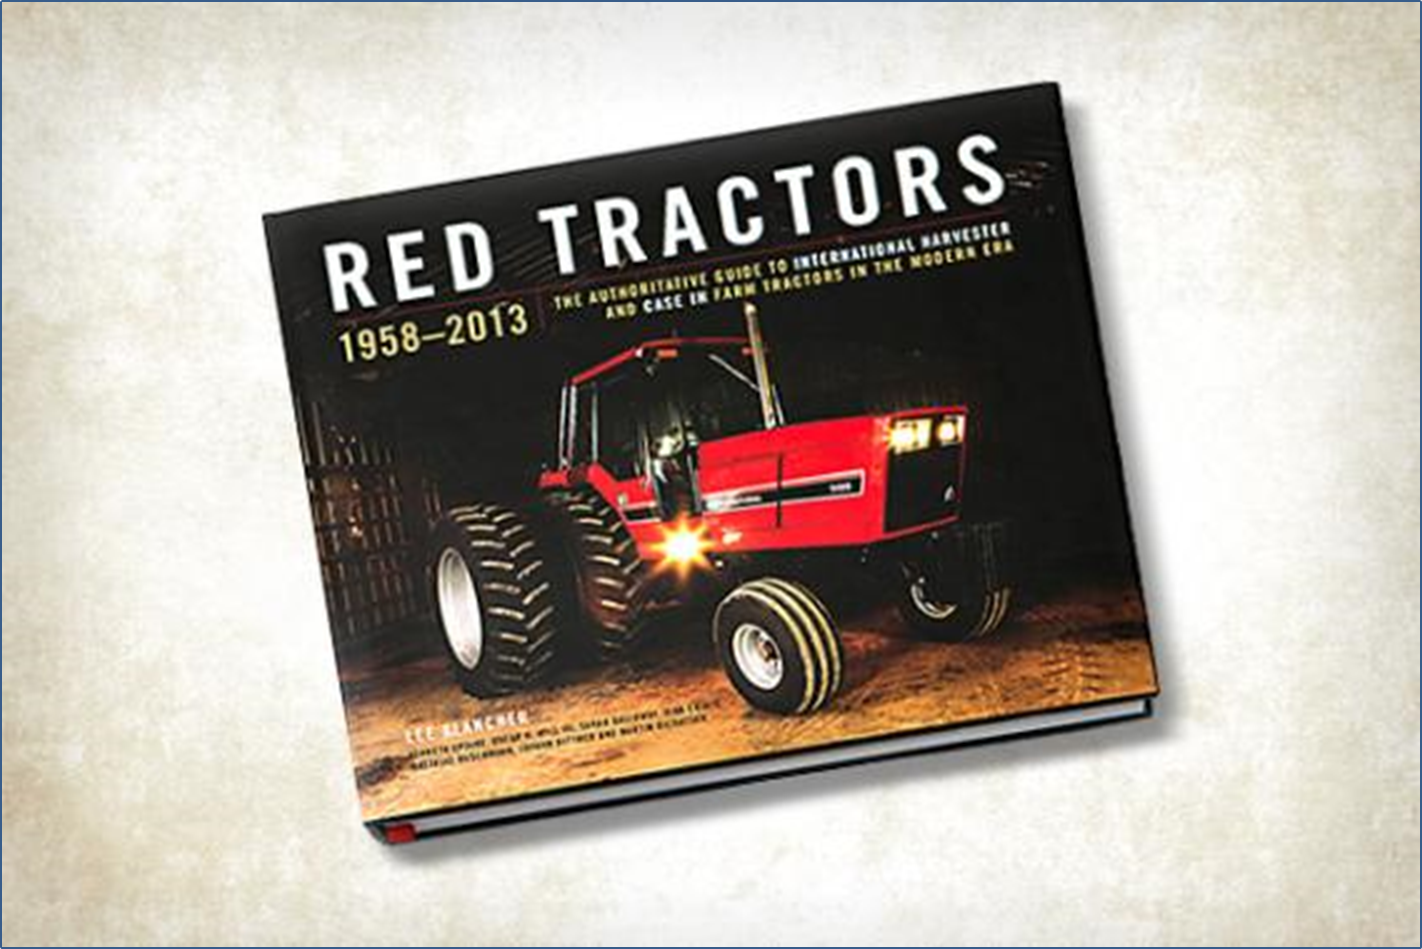 “Red Tractors 1958-2013” offers an unparalleled look at the International Harvester story and the next chapter